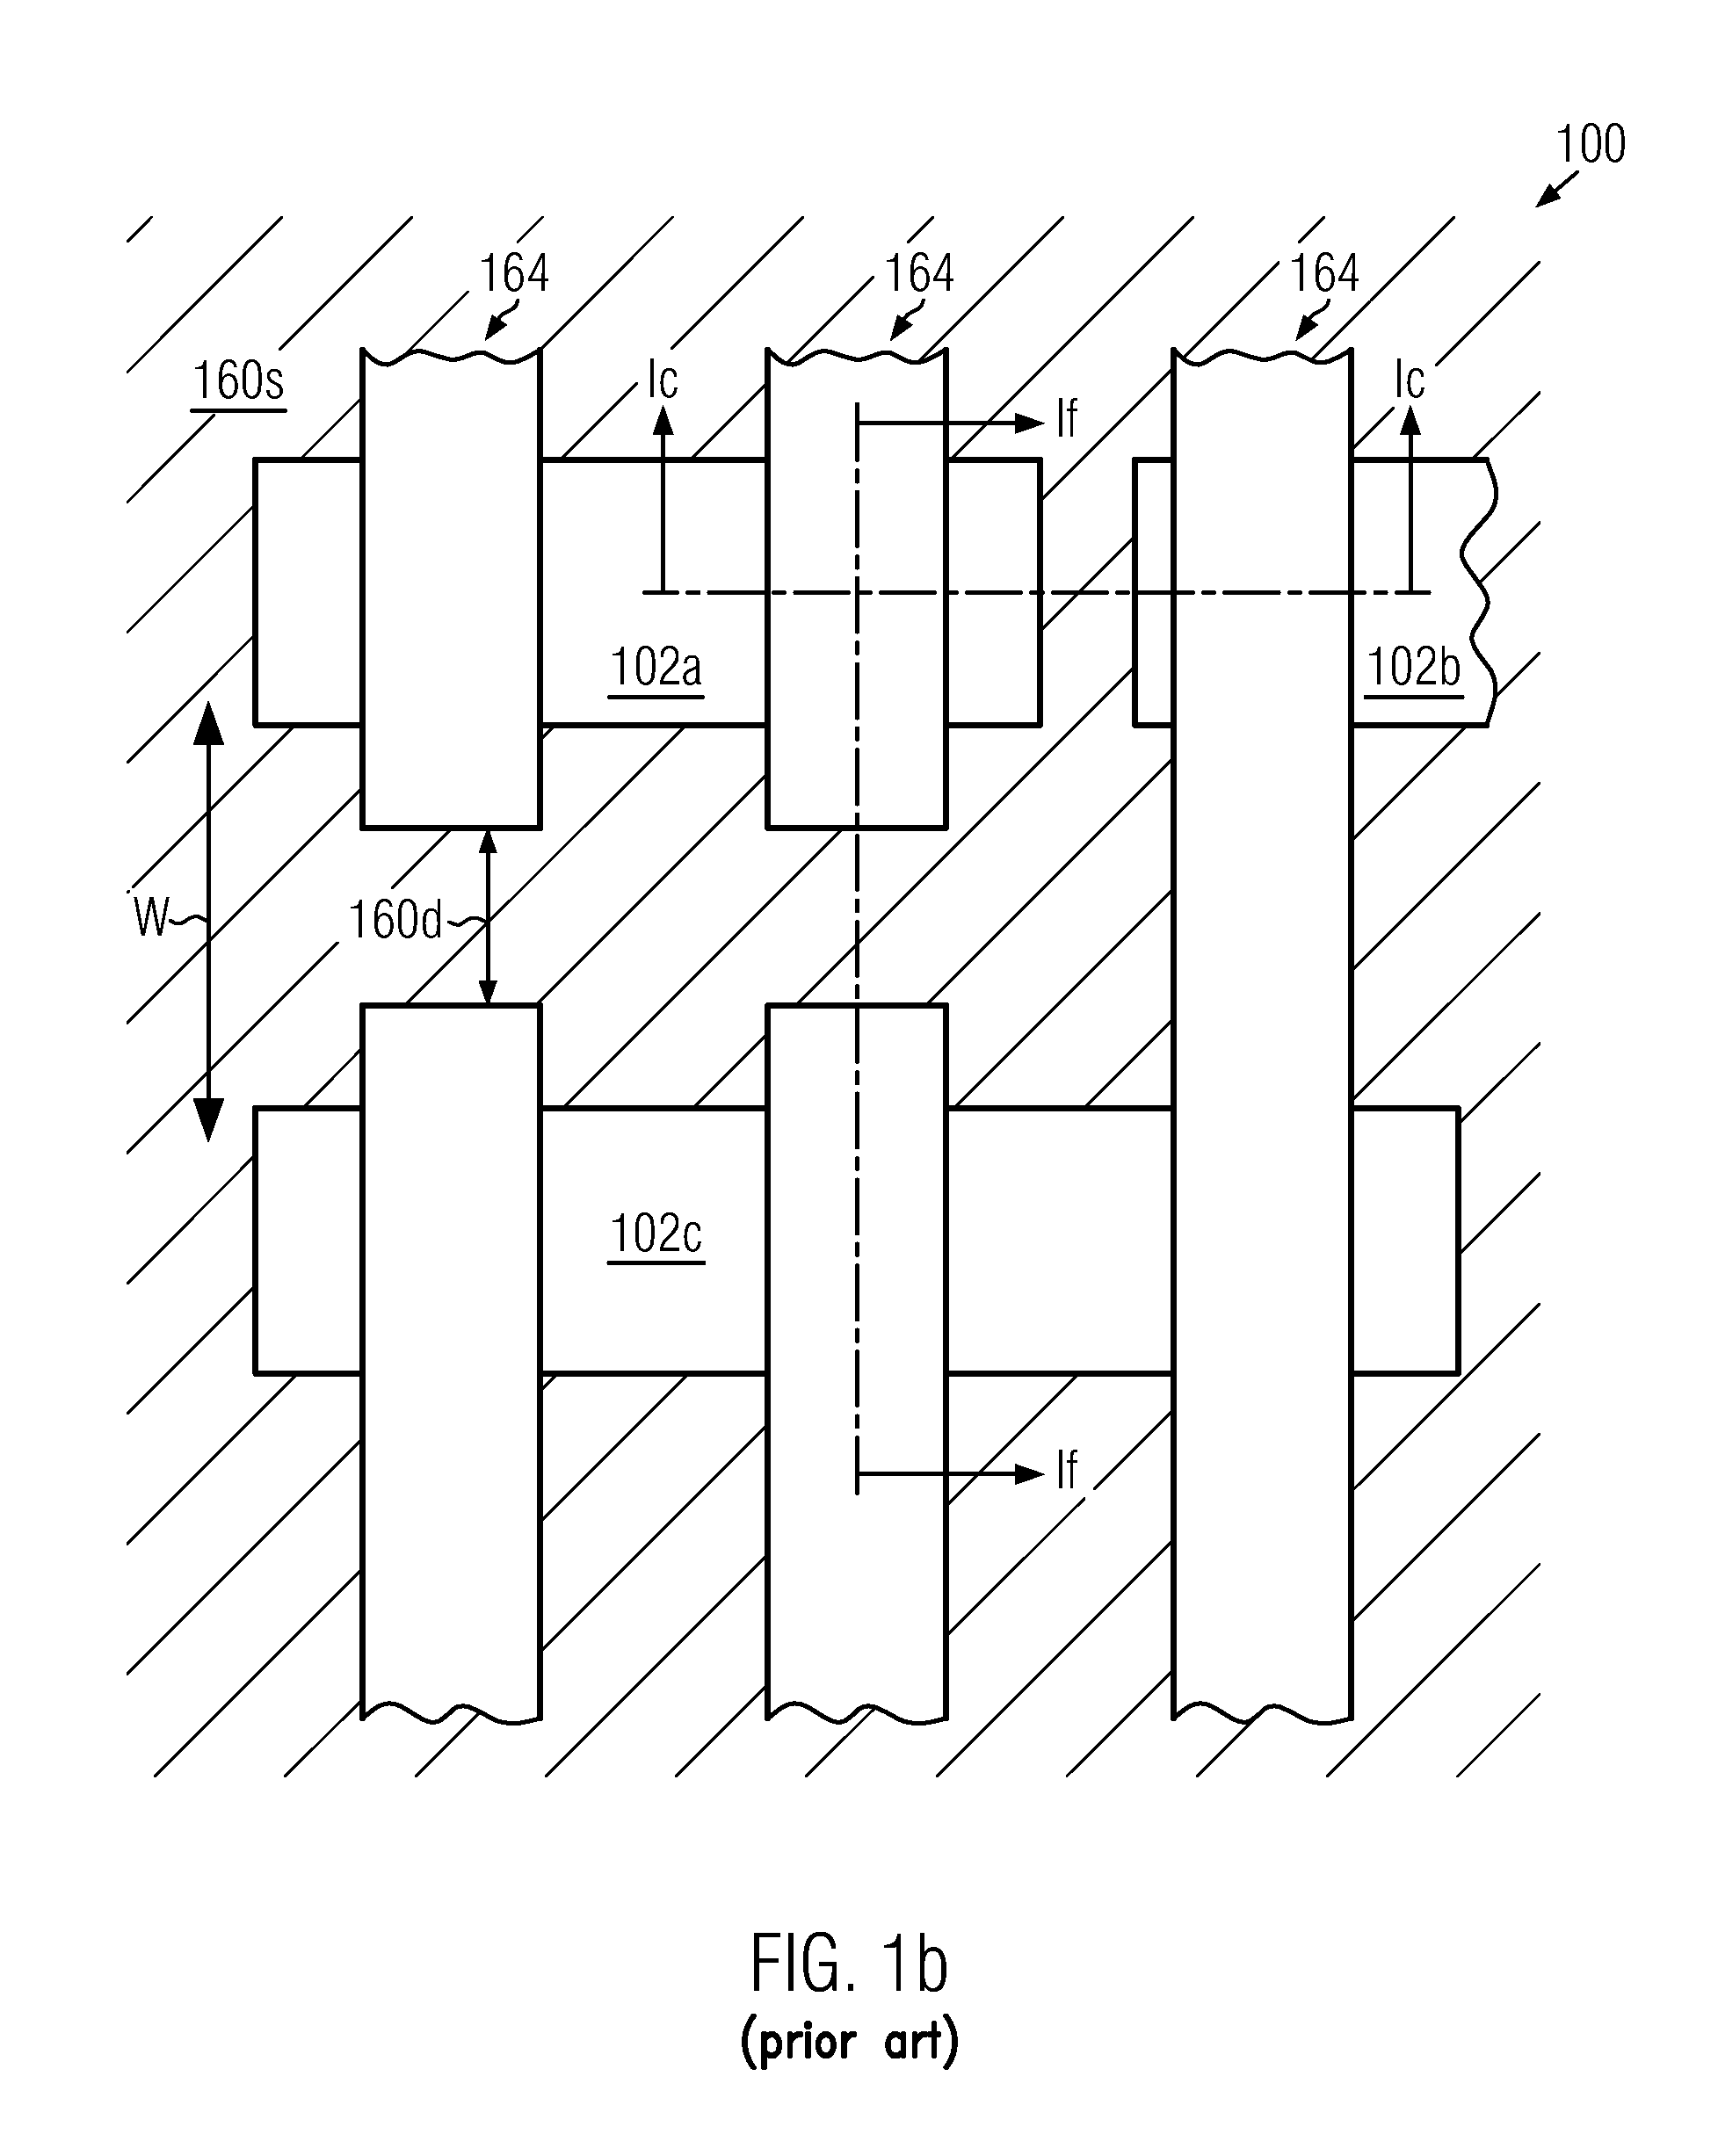 Superior Integrity of High-K Metal Gate Stacks by Preserving a Resist Material Above End Caps of Gate Electrode Structures